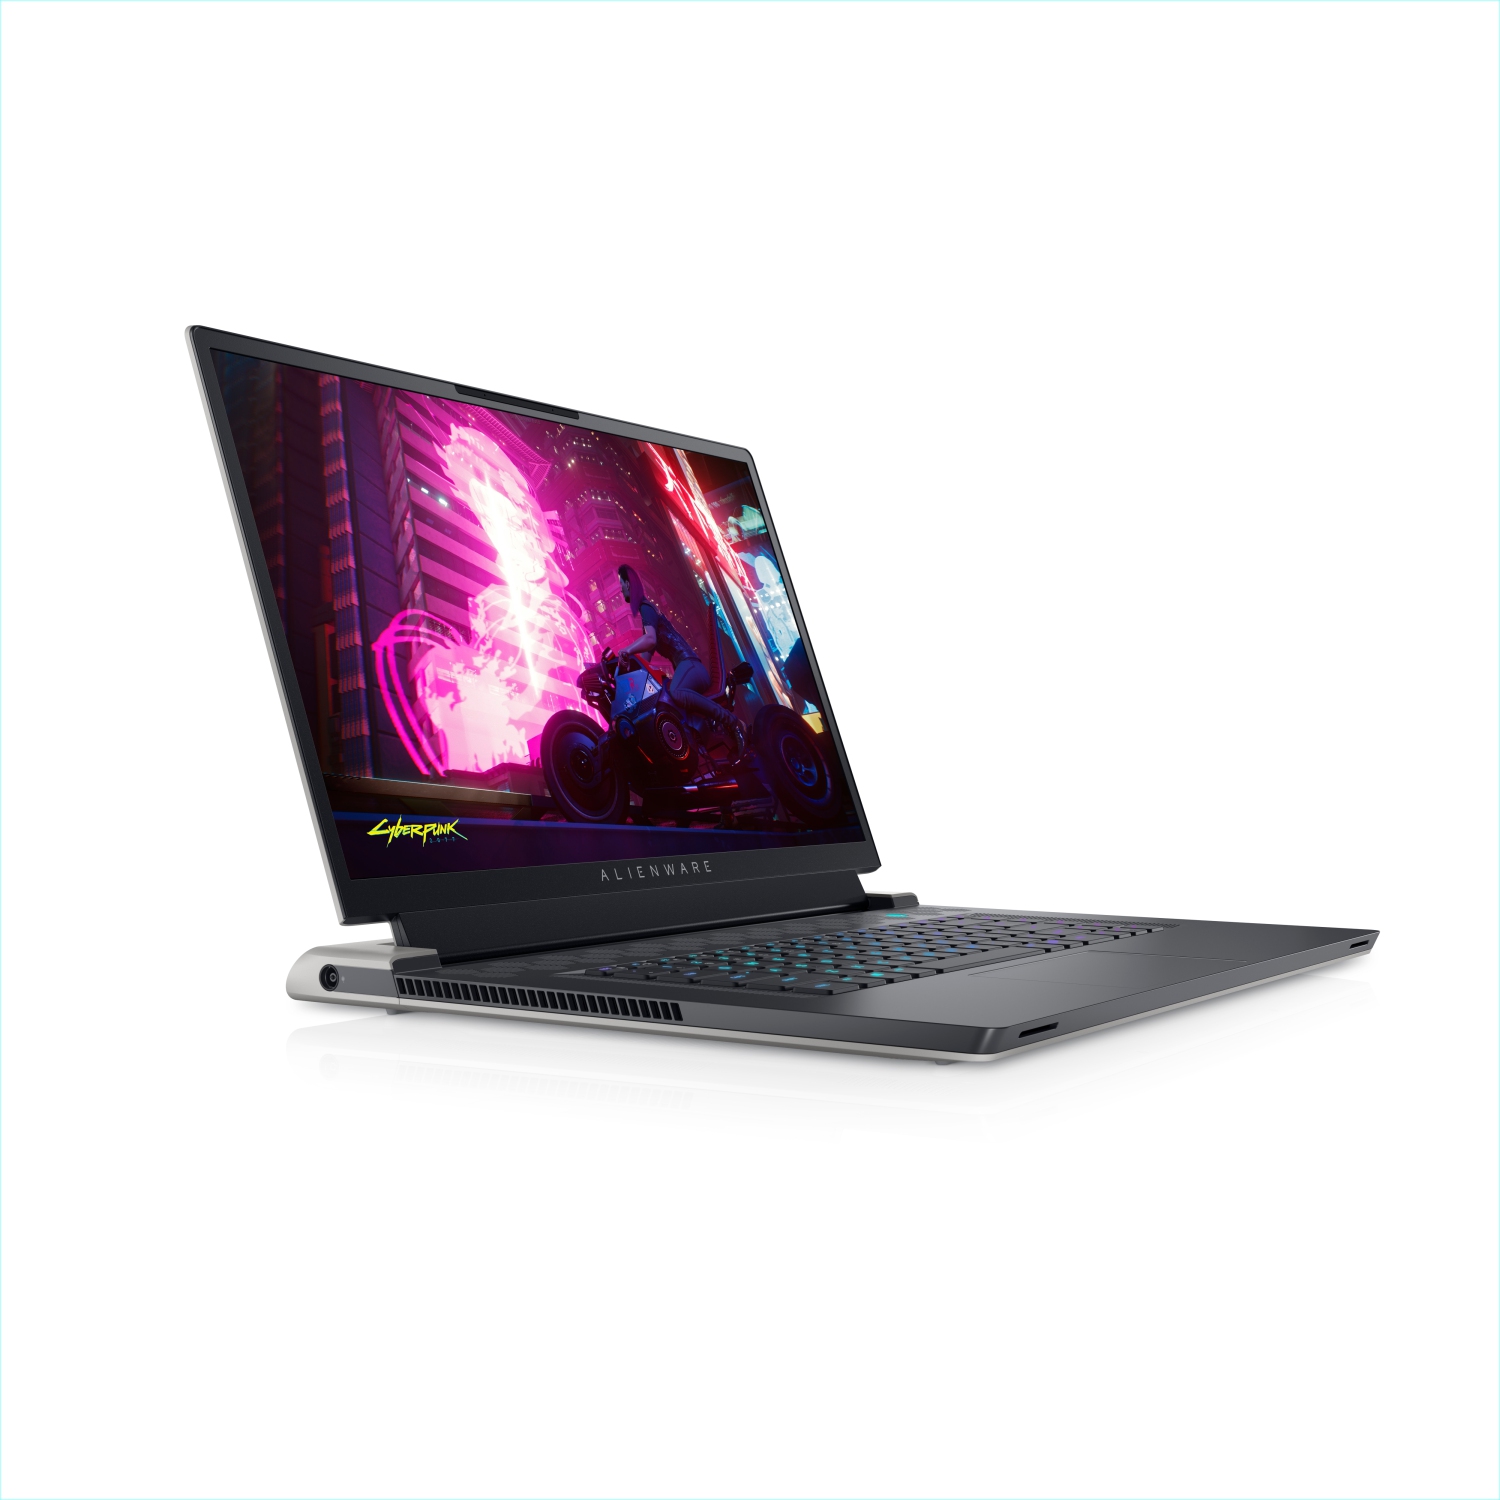 Refurbished (Excellent) - Dell Alienware X17 R1 Gaming Laptop (2021), 17.3" 4K, Core i7, 2TB SSD, 64GB RAM, RTX 3080, 8 Cores @ 4.6 GHz, 11th Gen CPU Certified